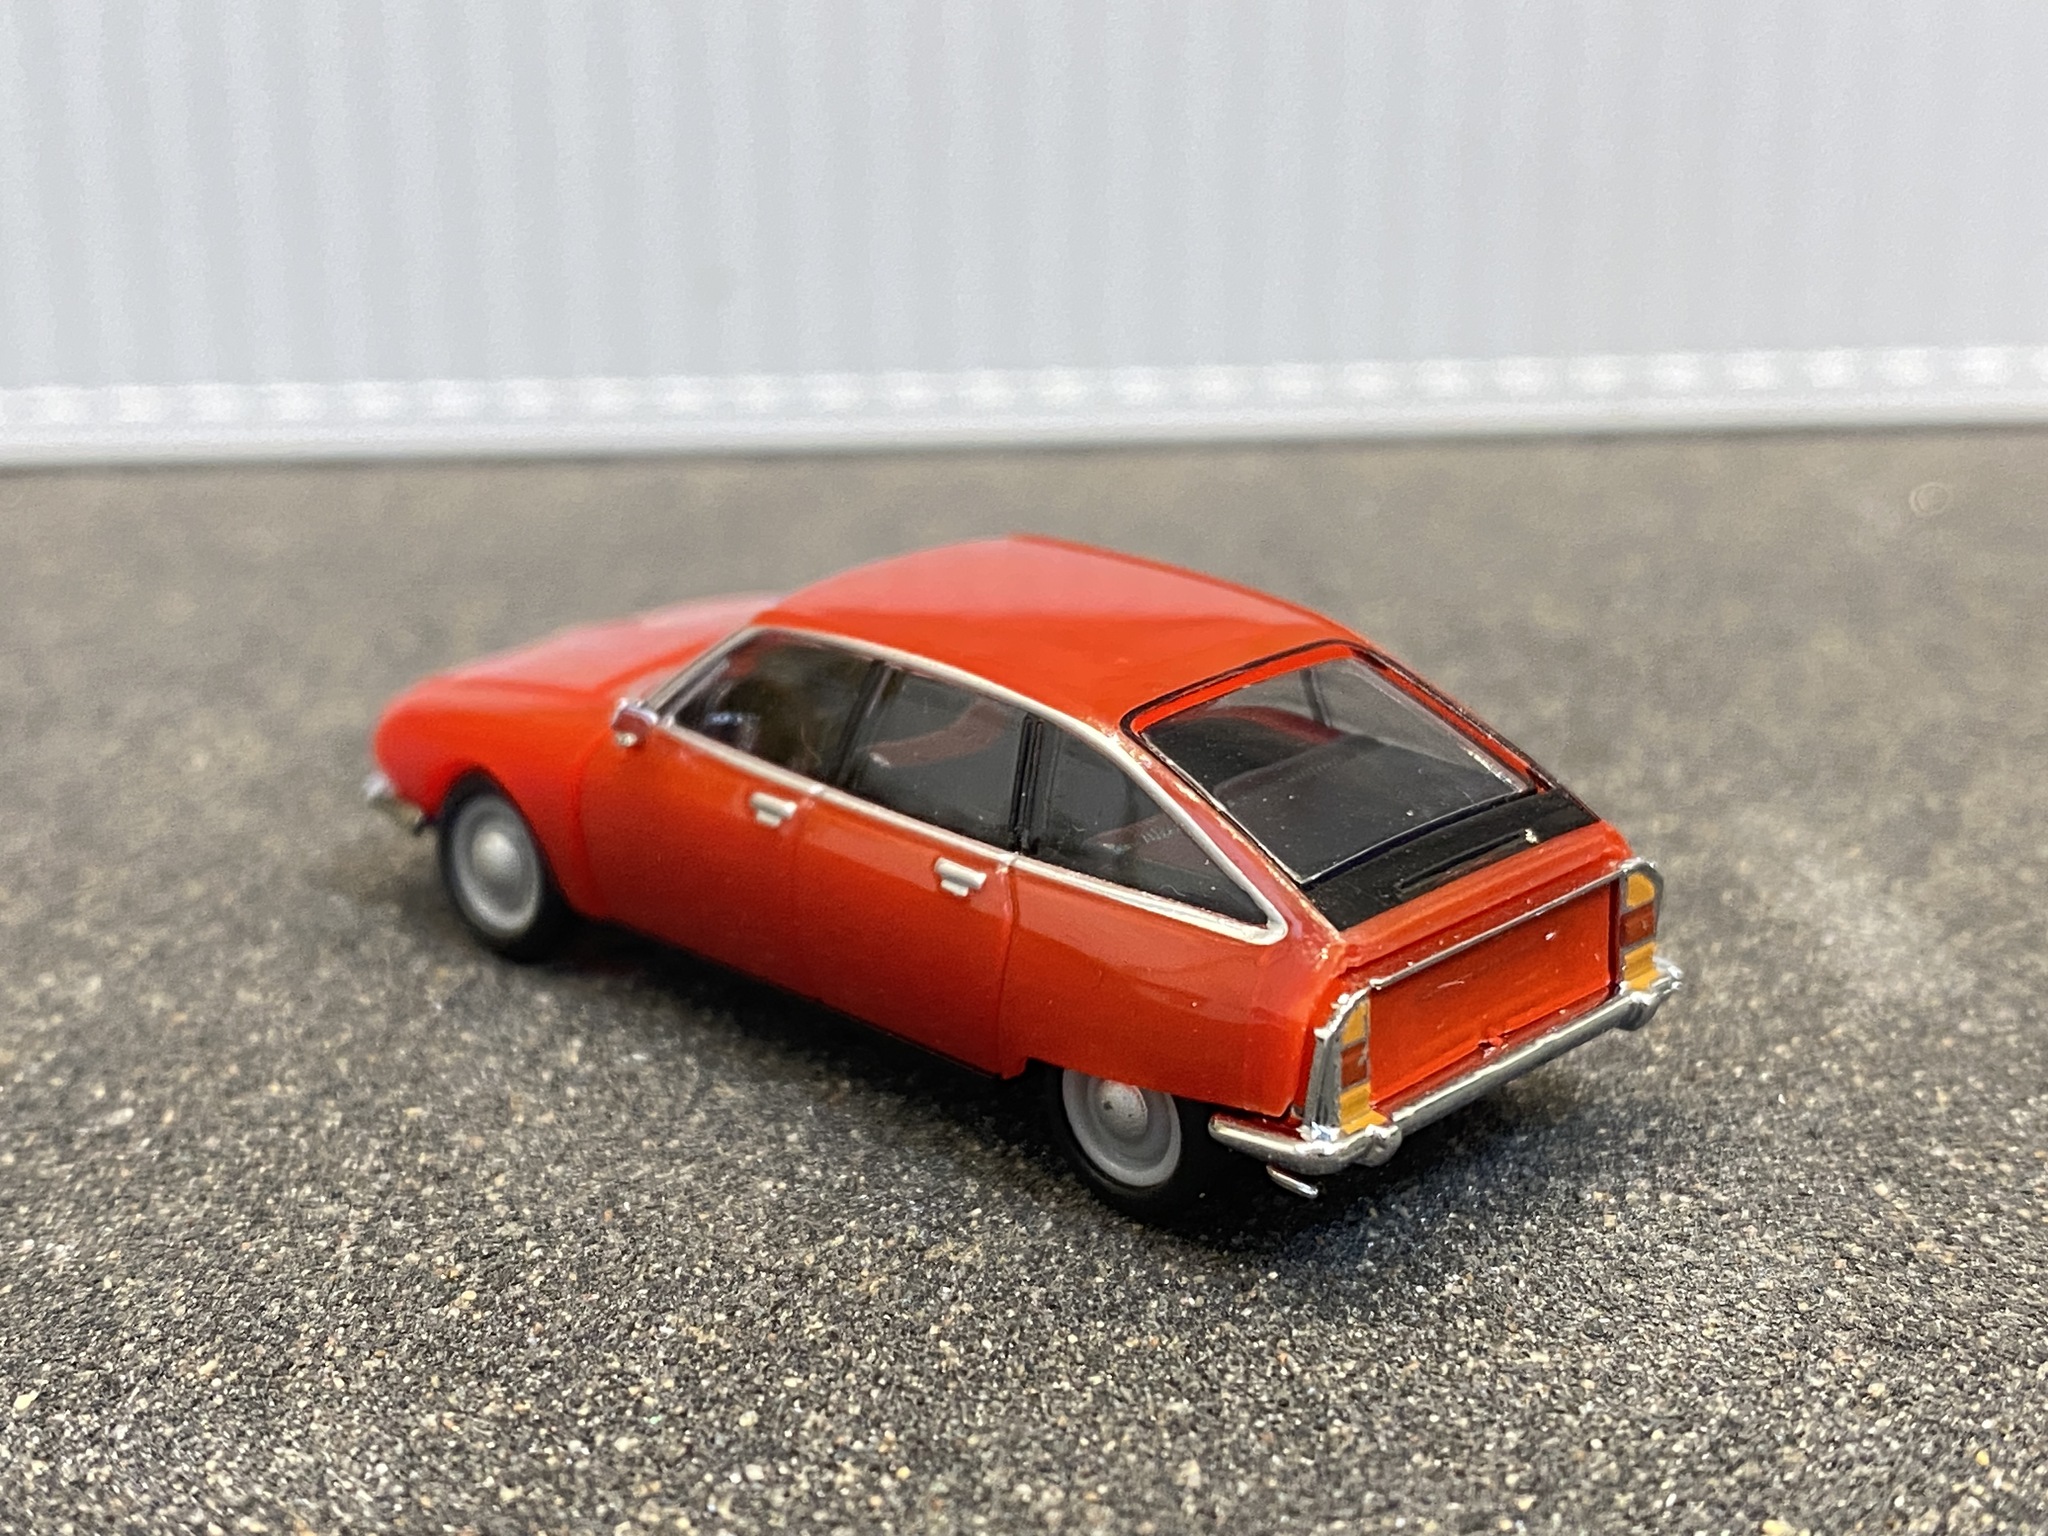 Scale 1/87 H0, Citroen GS, Red from Herpa